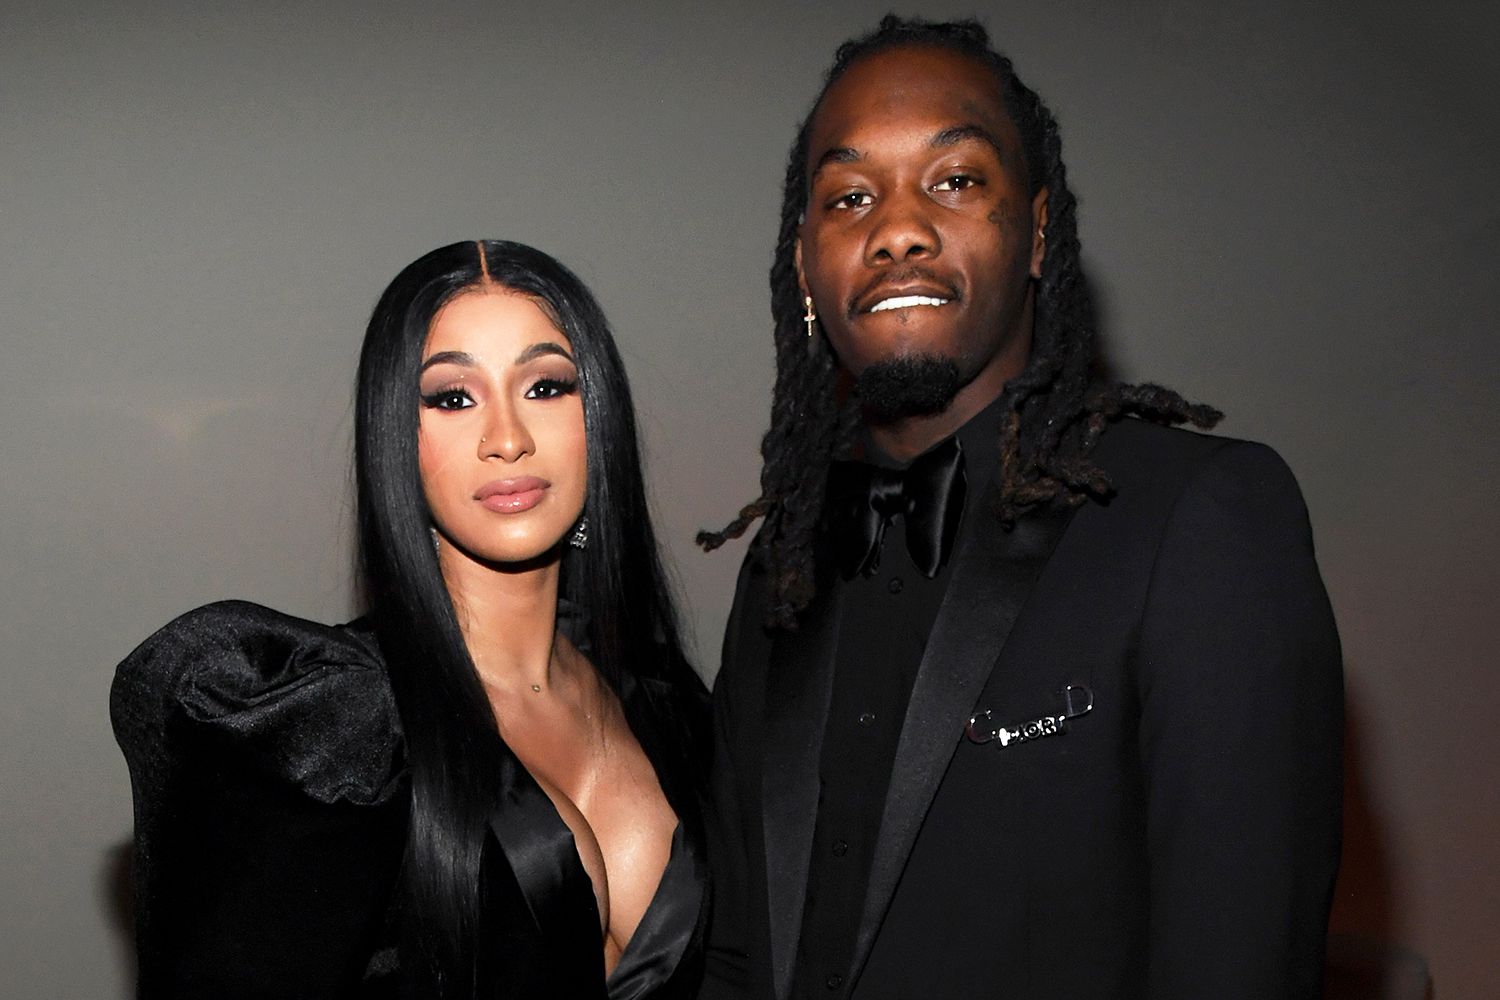 Cardi B and Offset to Perform at Separate NYE Shows in Same Hotel Amid Breakup